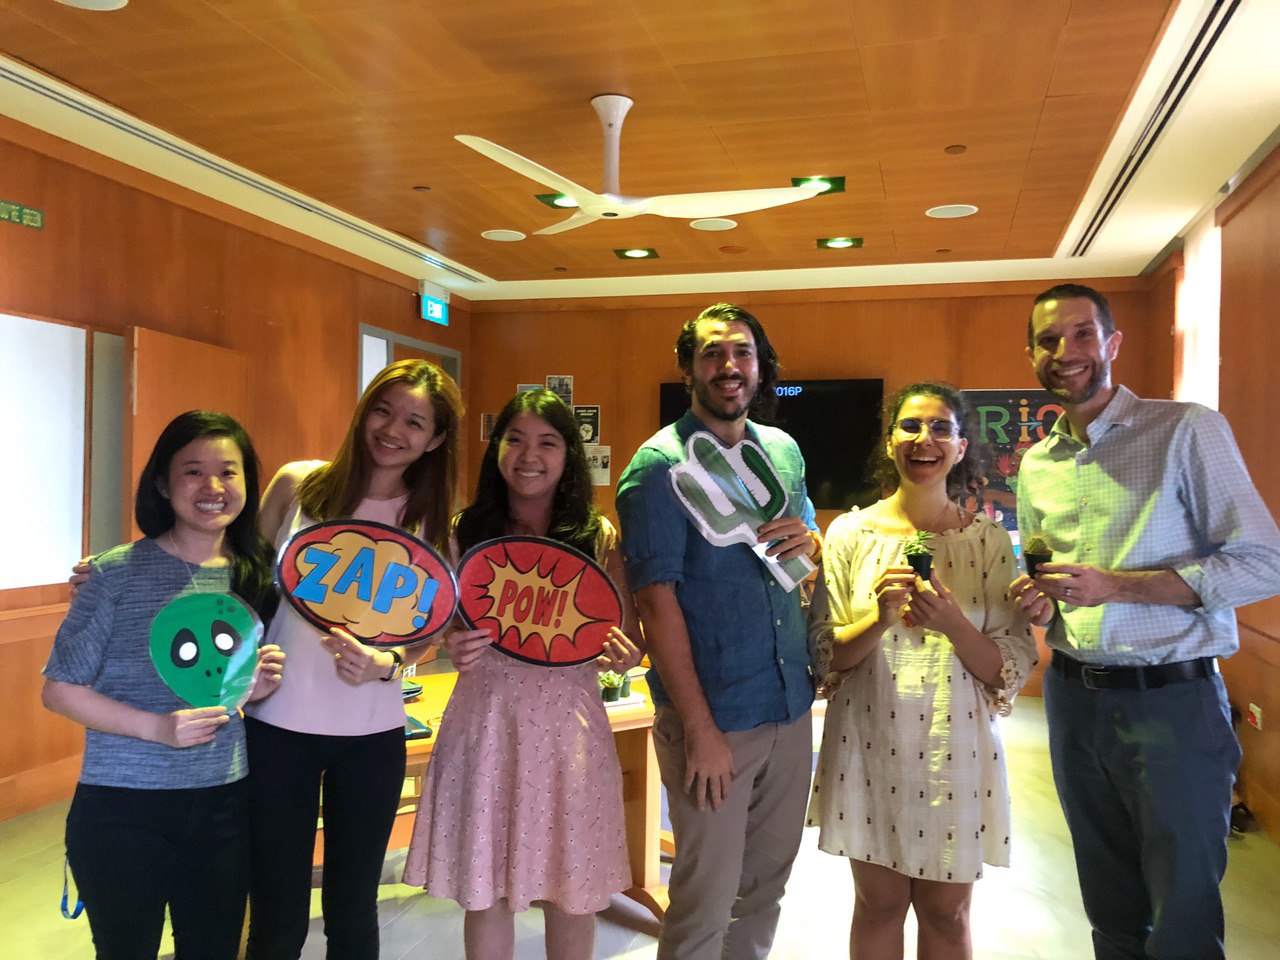 Photograph of six smiling staff members holding props. From left to right, a printed alien mask. Boards with ZAP and POW written on them. A cartoon drawing of a cactus. Two potted cactuses.